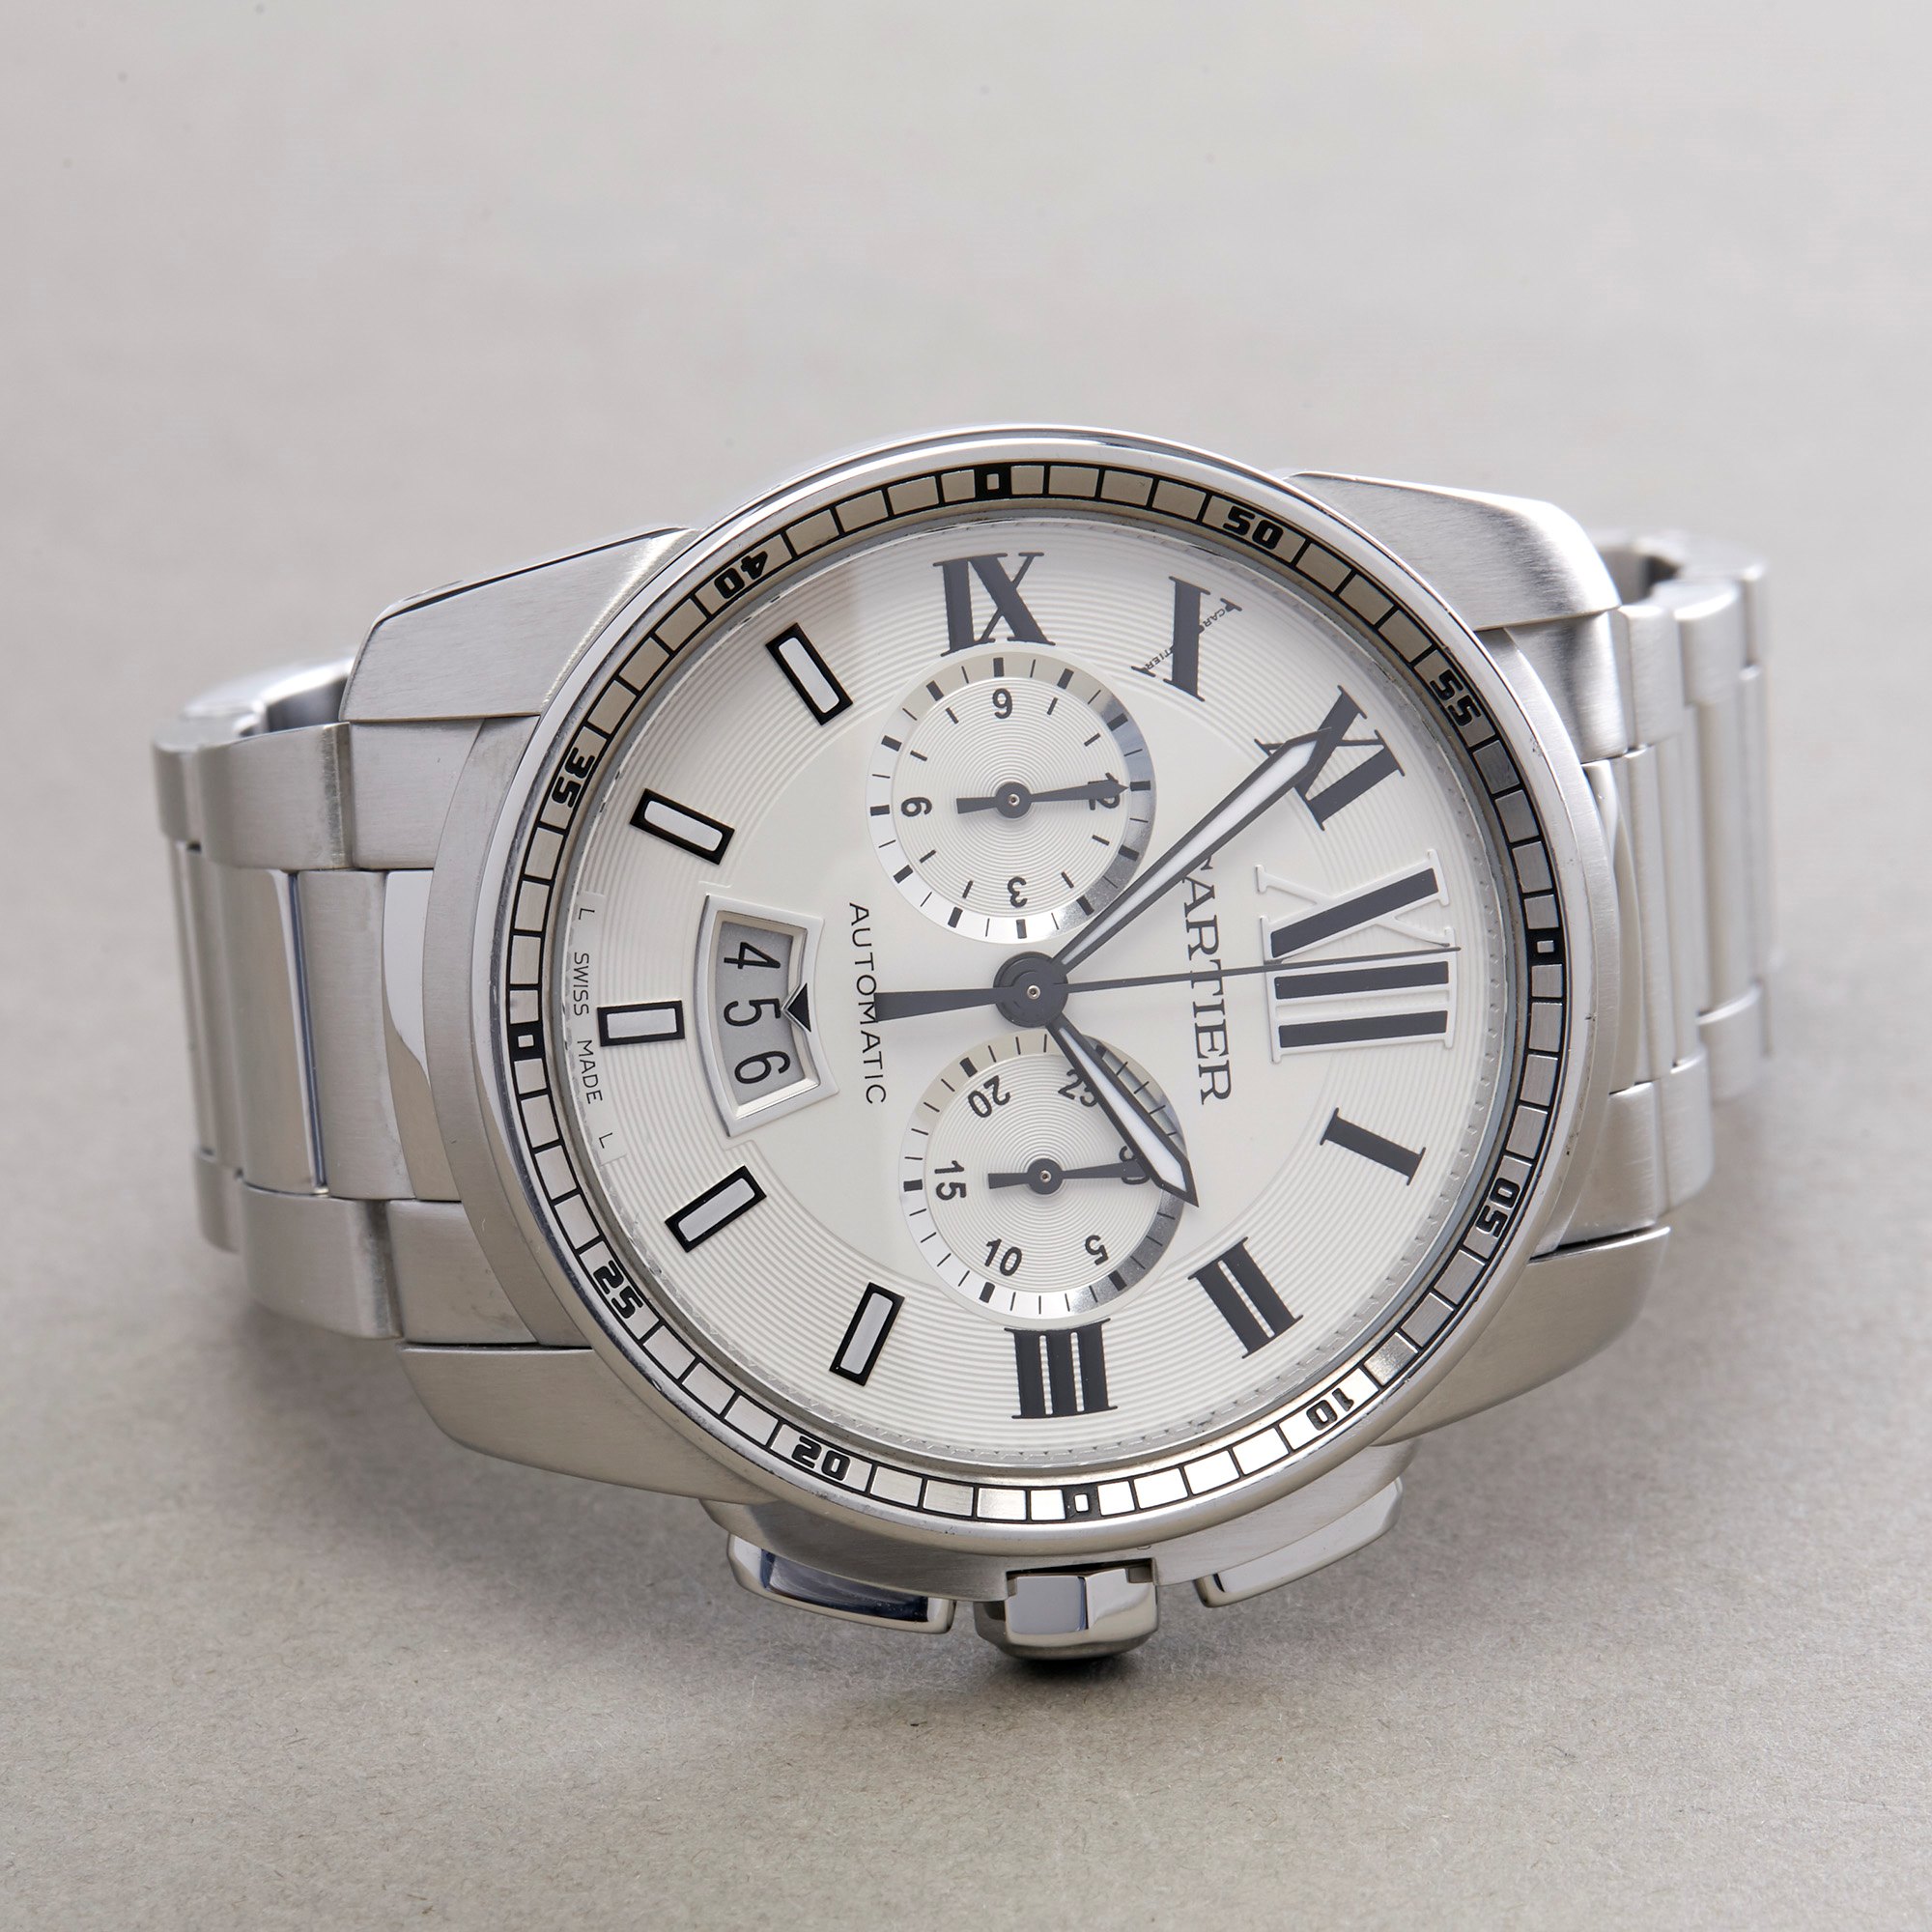 Cartier Calibre de Cartier Chronograph Stainless Steel Watch W7100045 or 3578 - Image 6 of 10